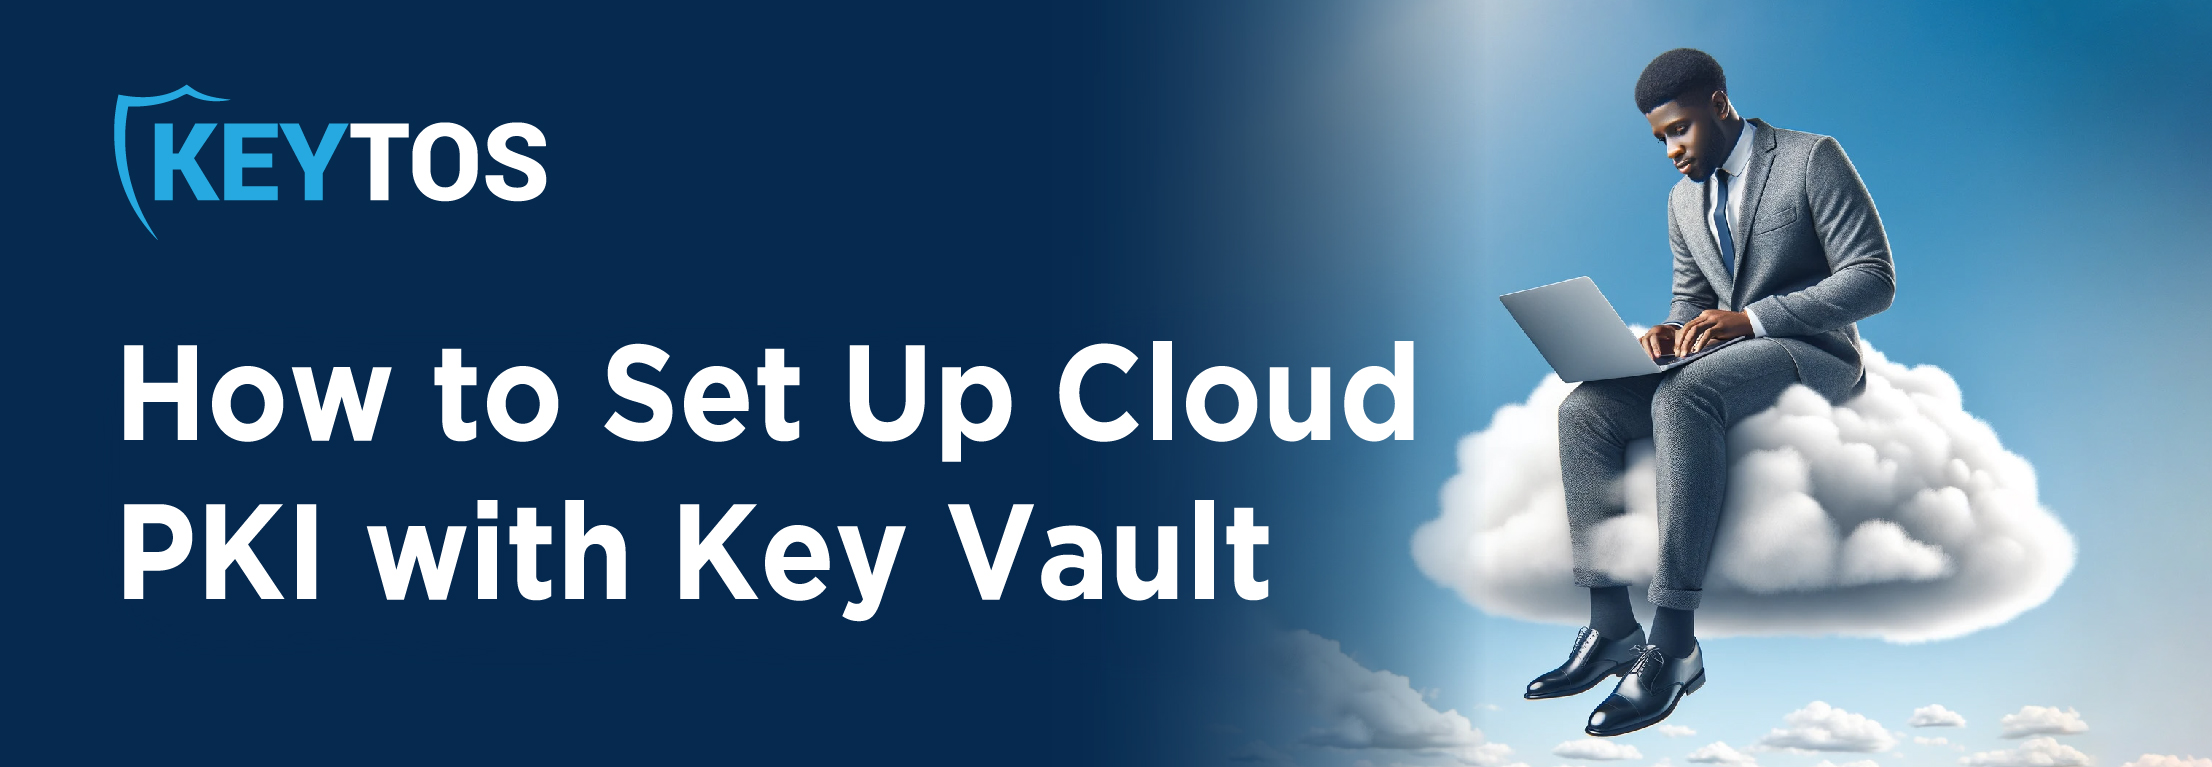 Cloud PKI Azure Key Vault. ADCS in Azure - How to protect your Private Keys with Azure Key Vault or dedicated HSM.